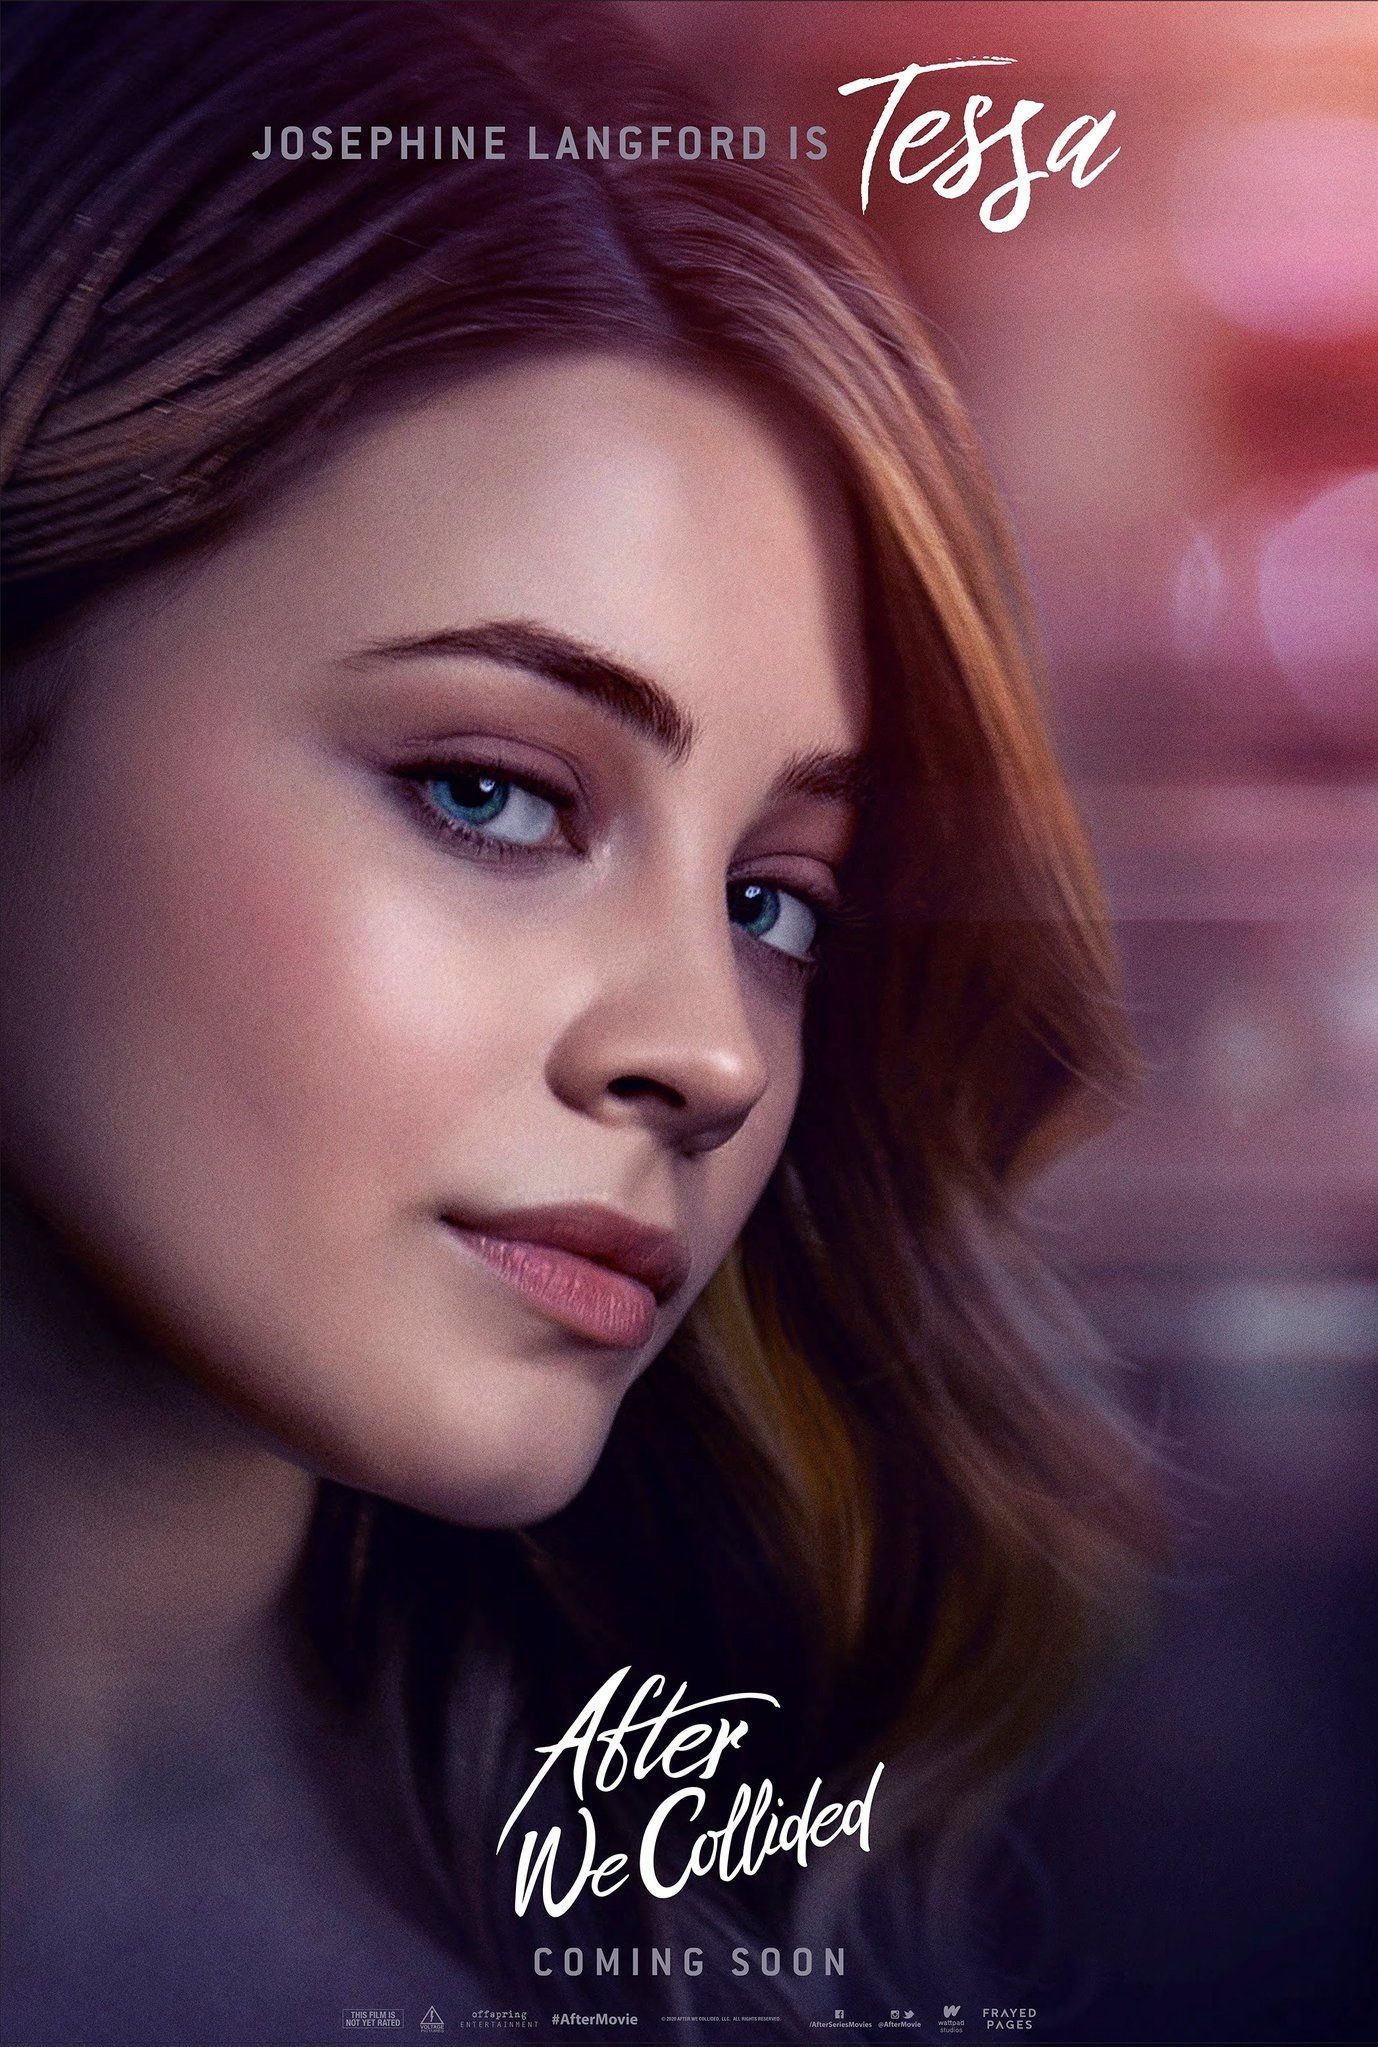 After We Collided: Josephine Langford as Tessa, Cinematography by Larry Reibman. 1380x2050 HD Wallpaper.